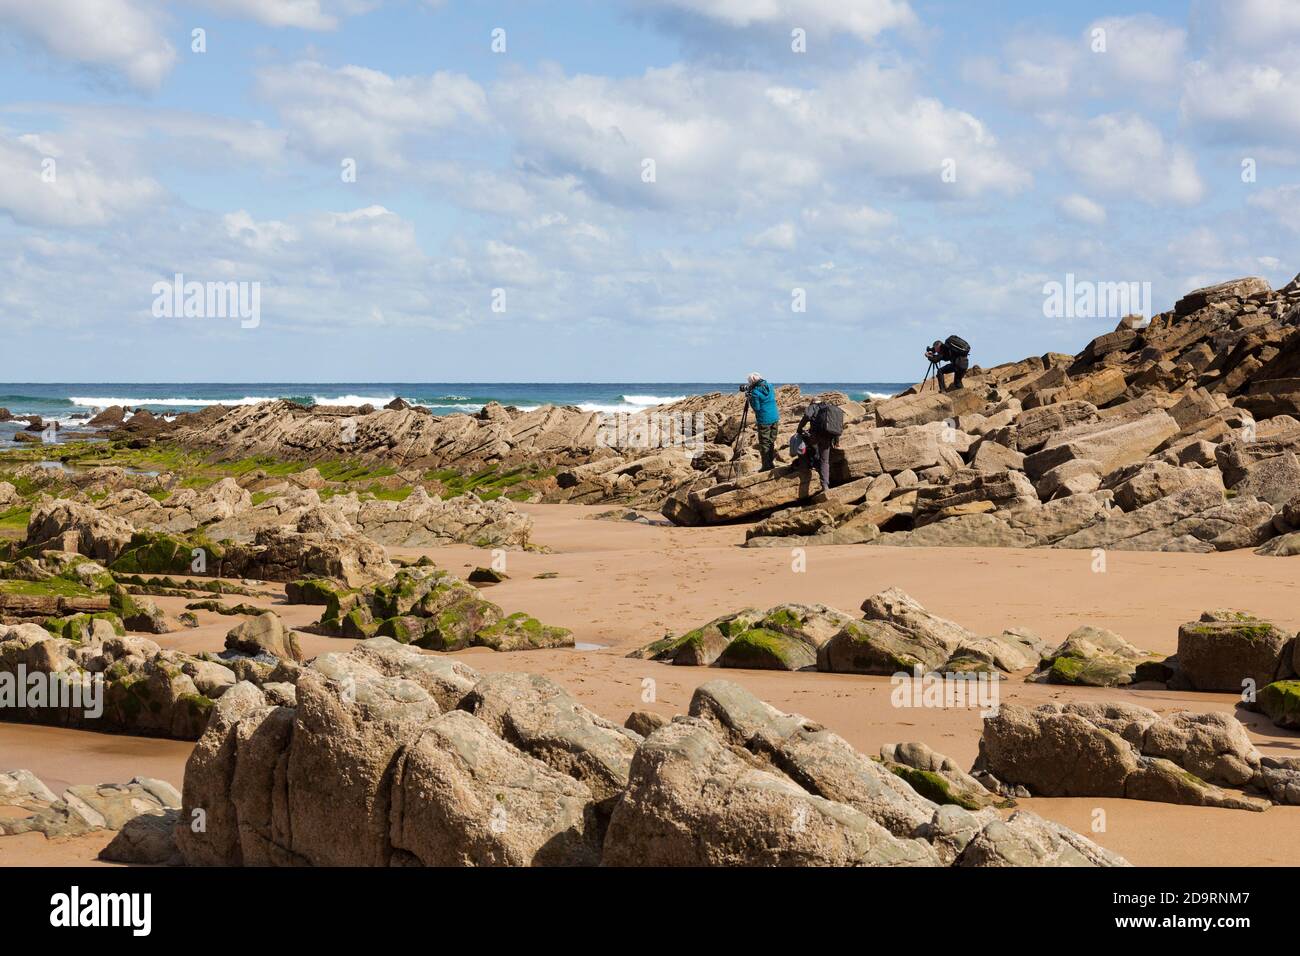 Three photographers taking pictures at a rocky beach Stock Photo